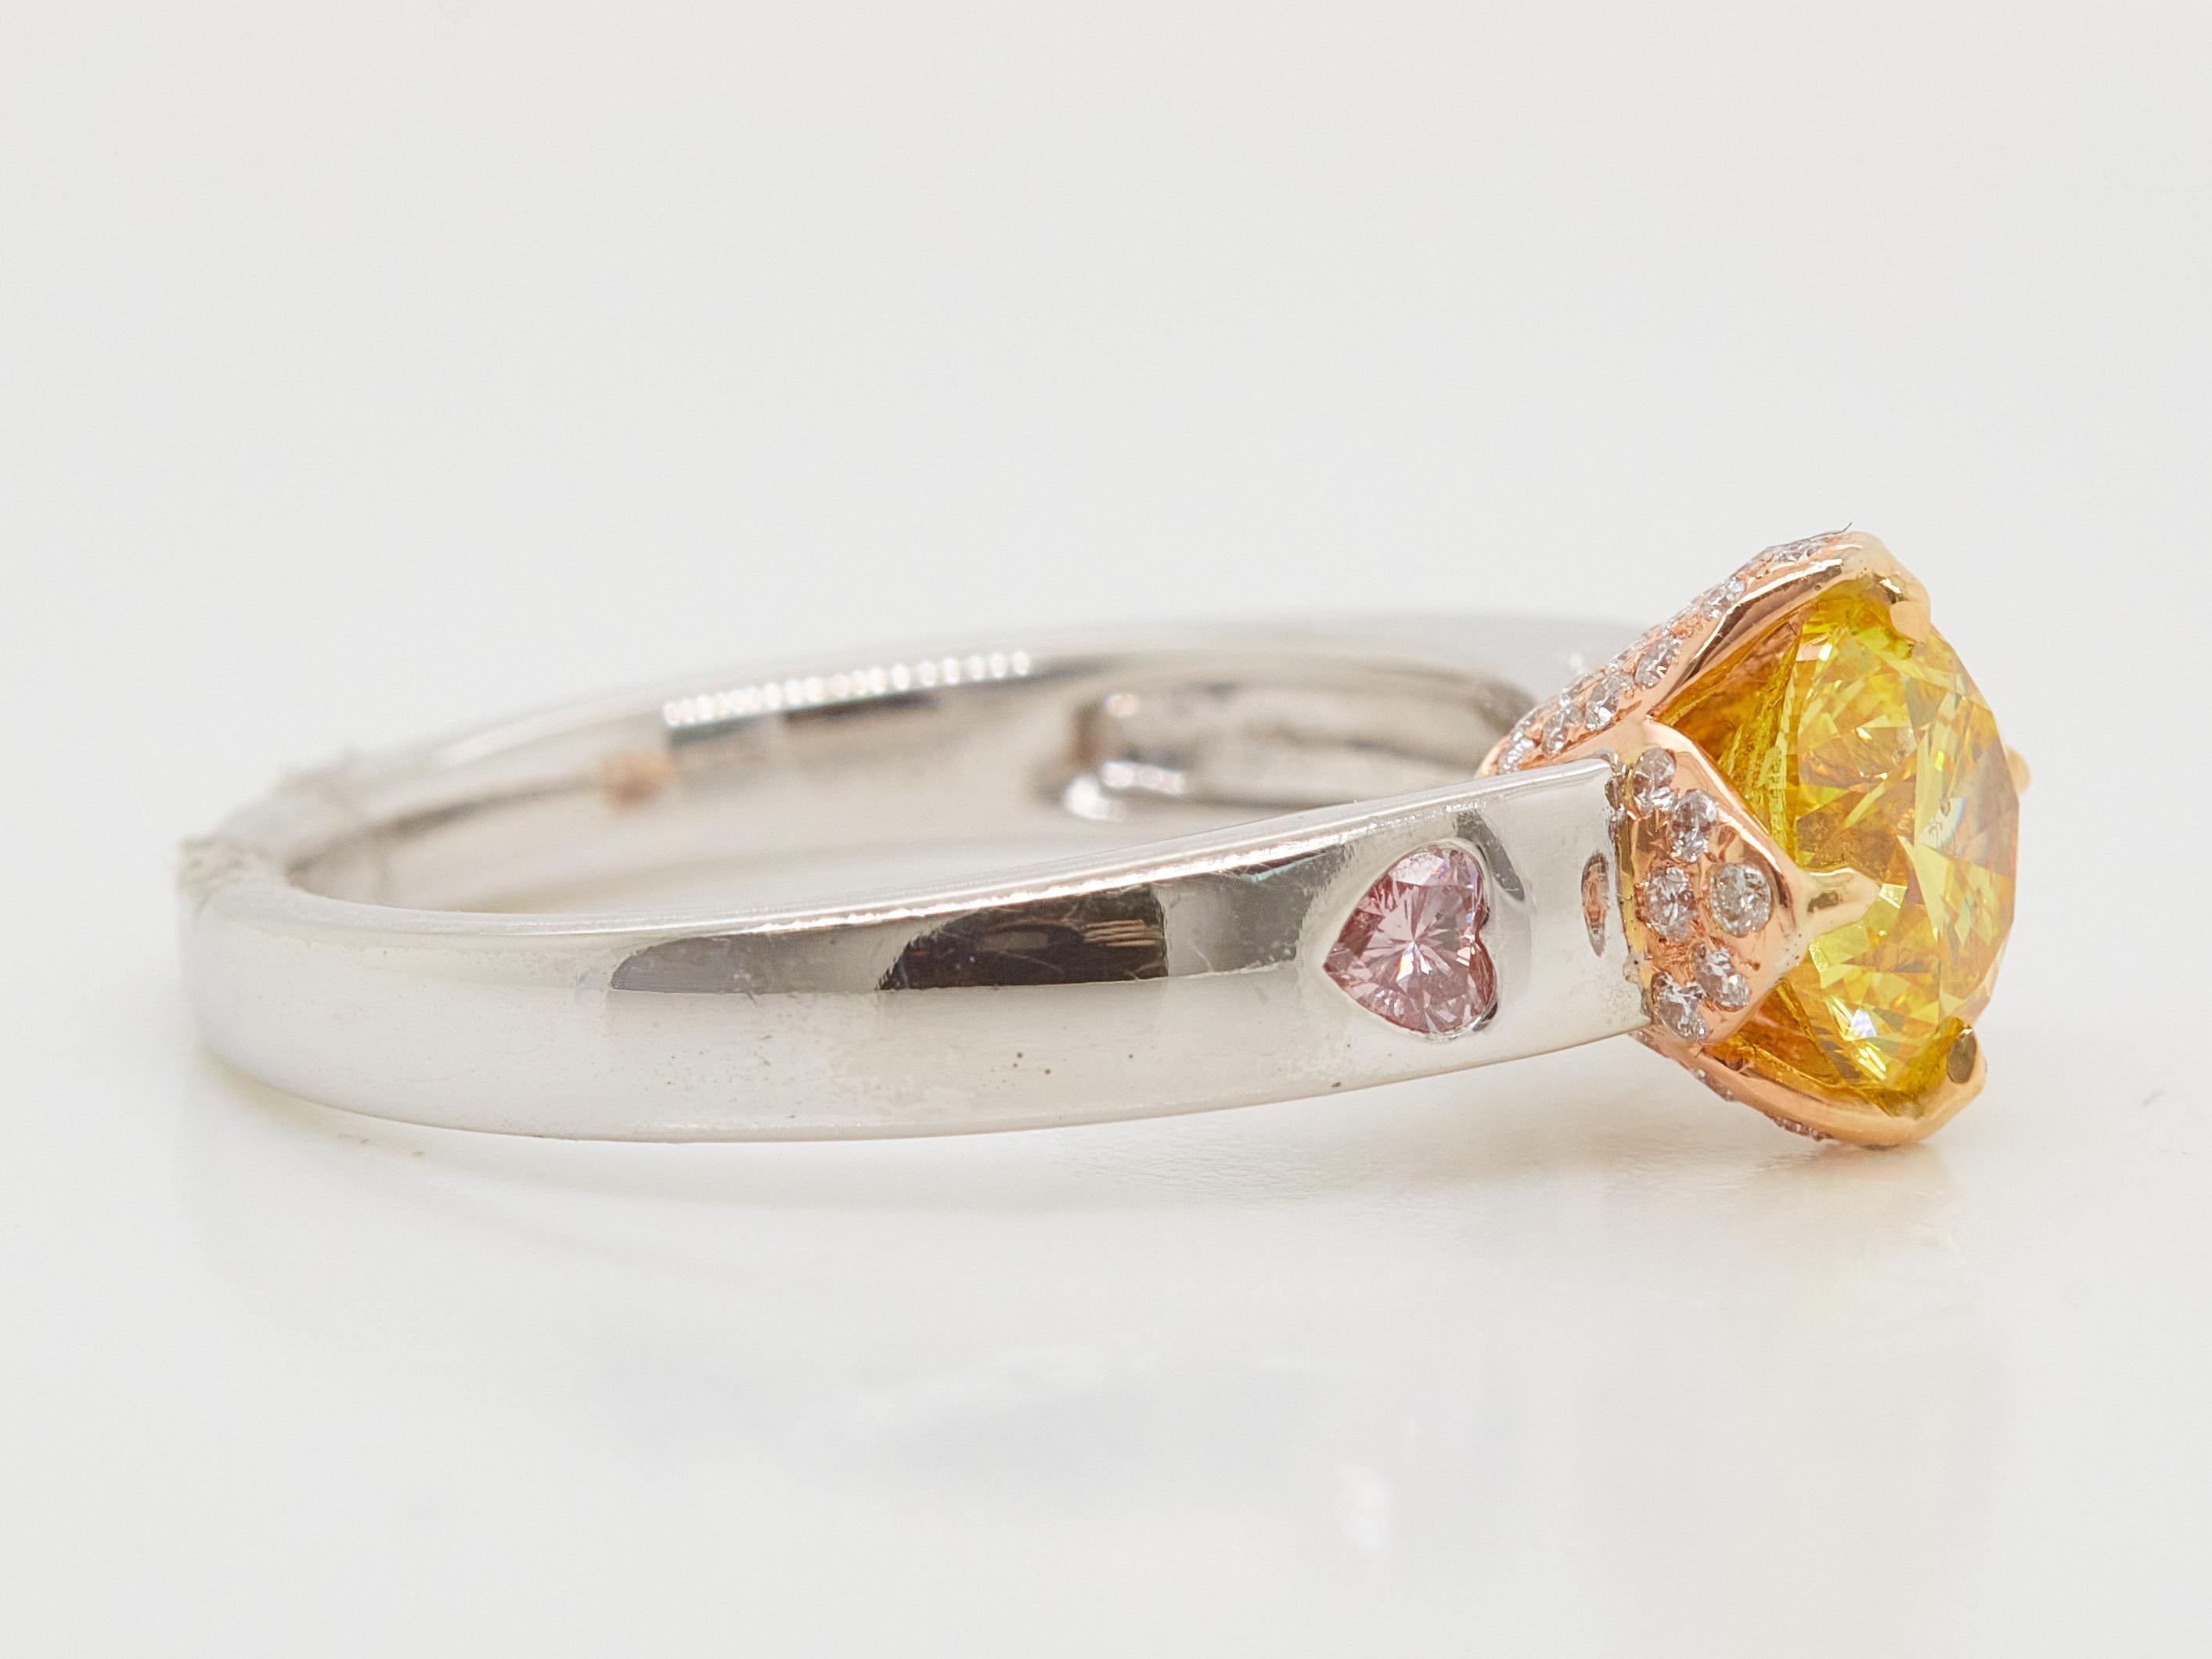 Contemporary 1.30 Carat Fancy Vivid Yellow Diamond Ring With Heart-shape pink Diamonds For Sale